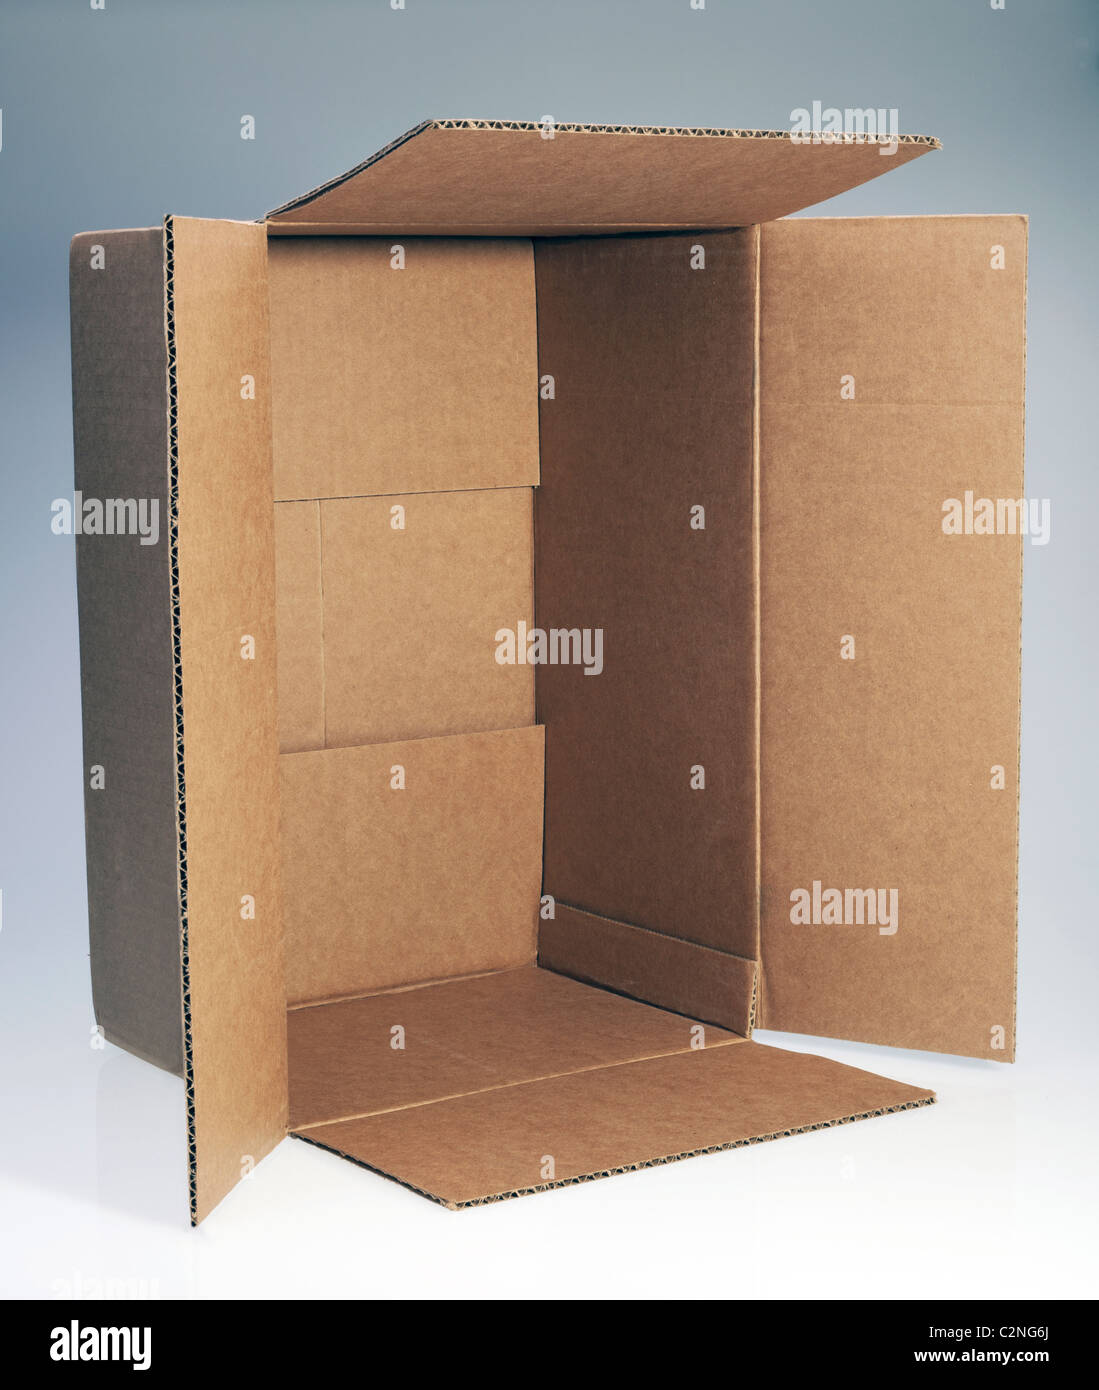 Brown, open cardboard box for design layout Stock Photo